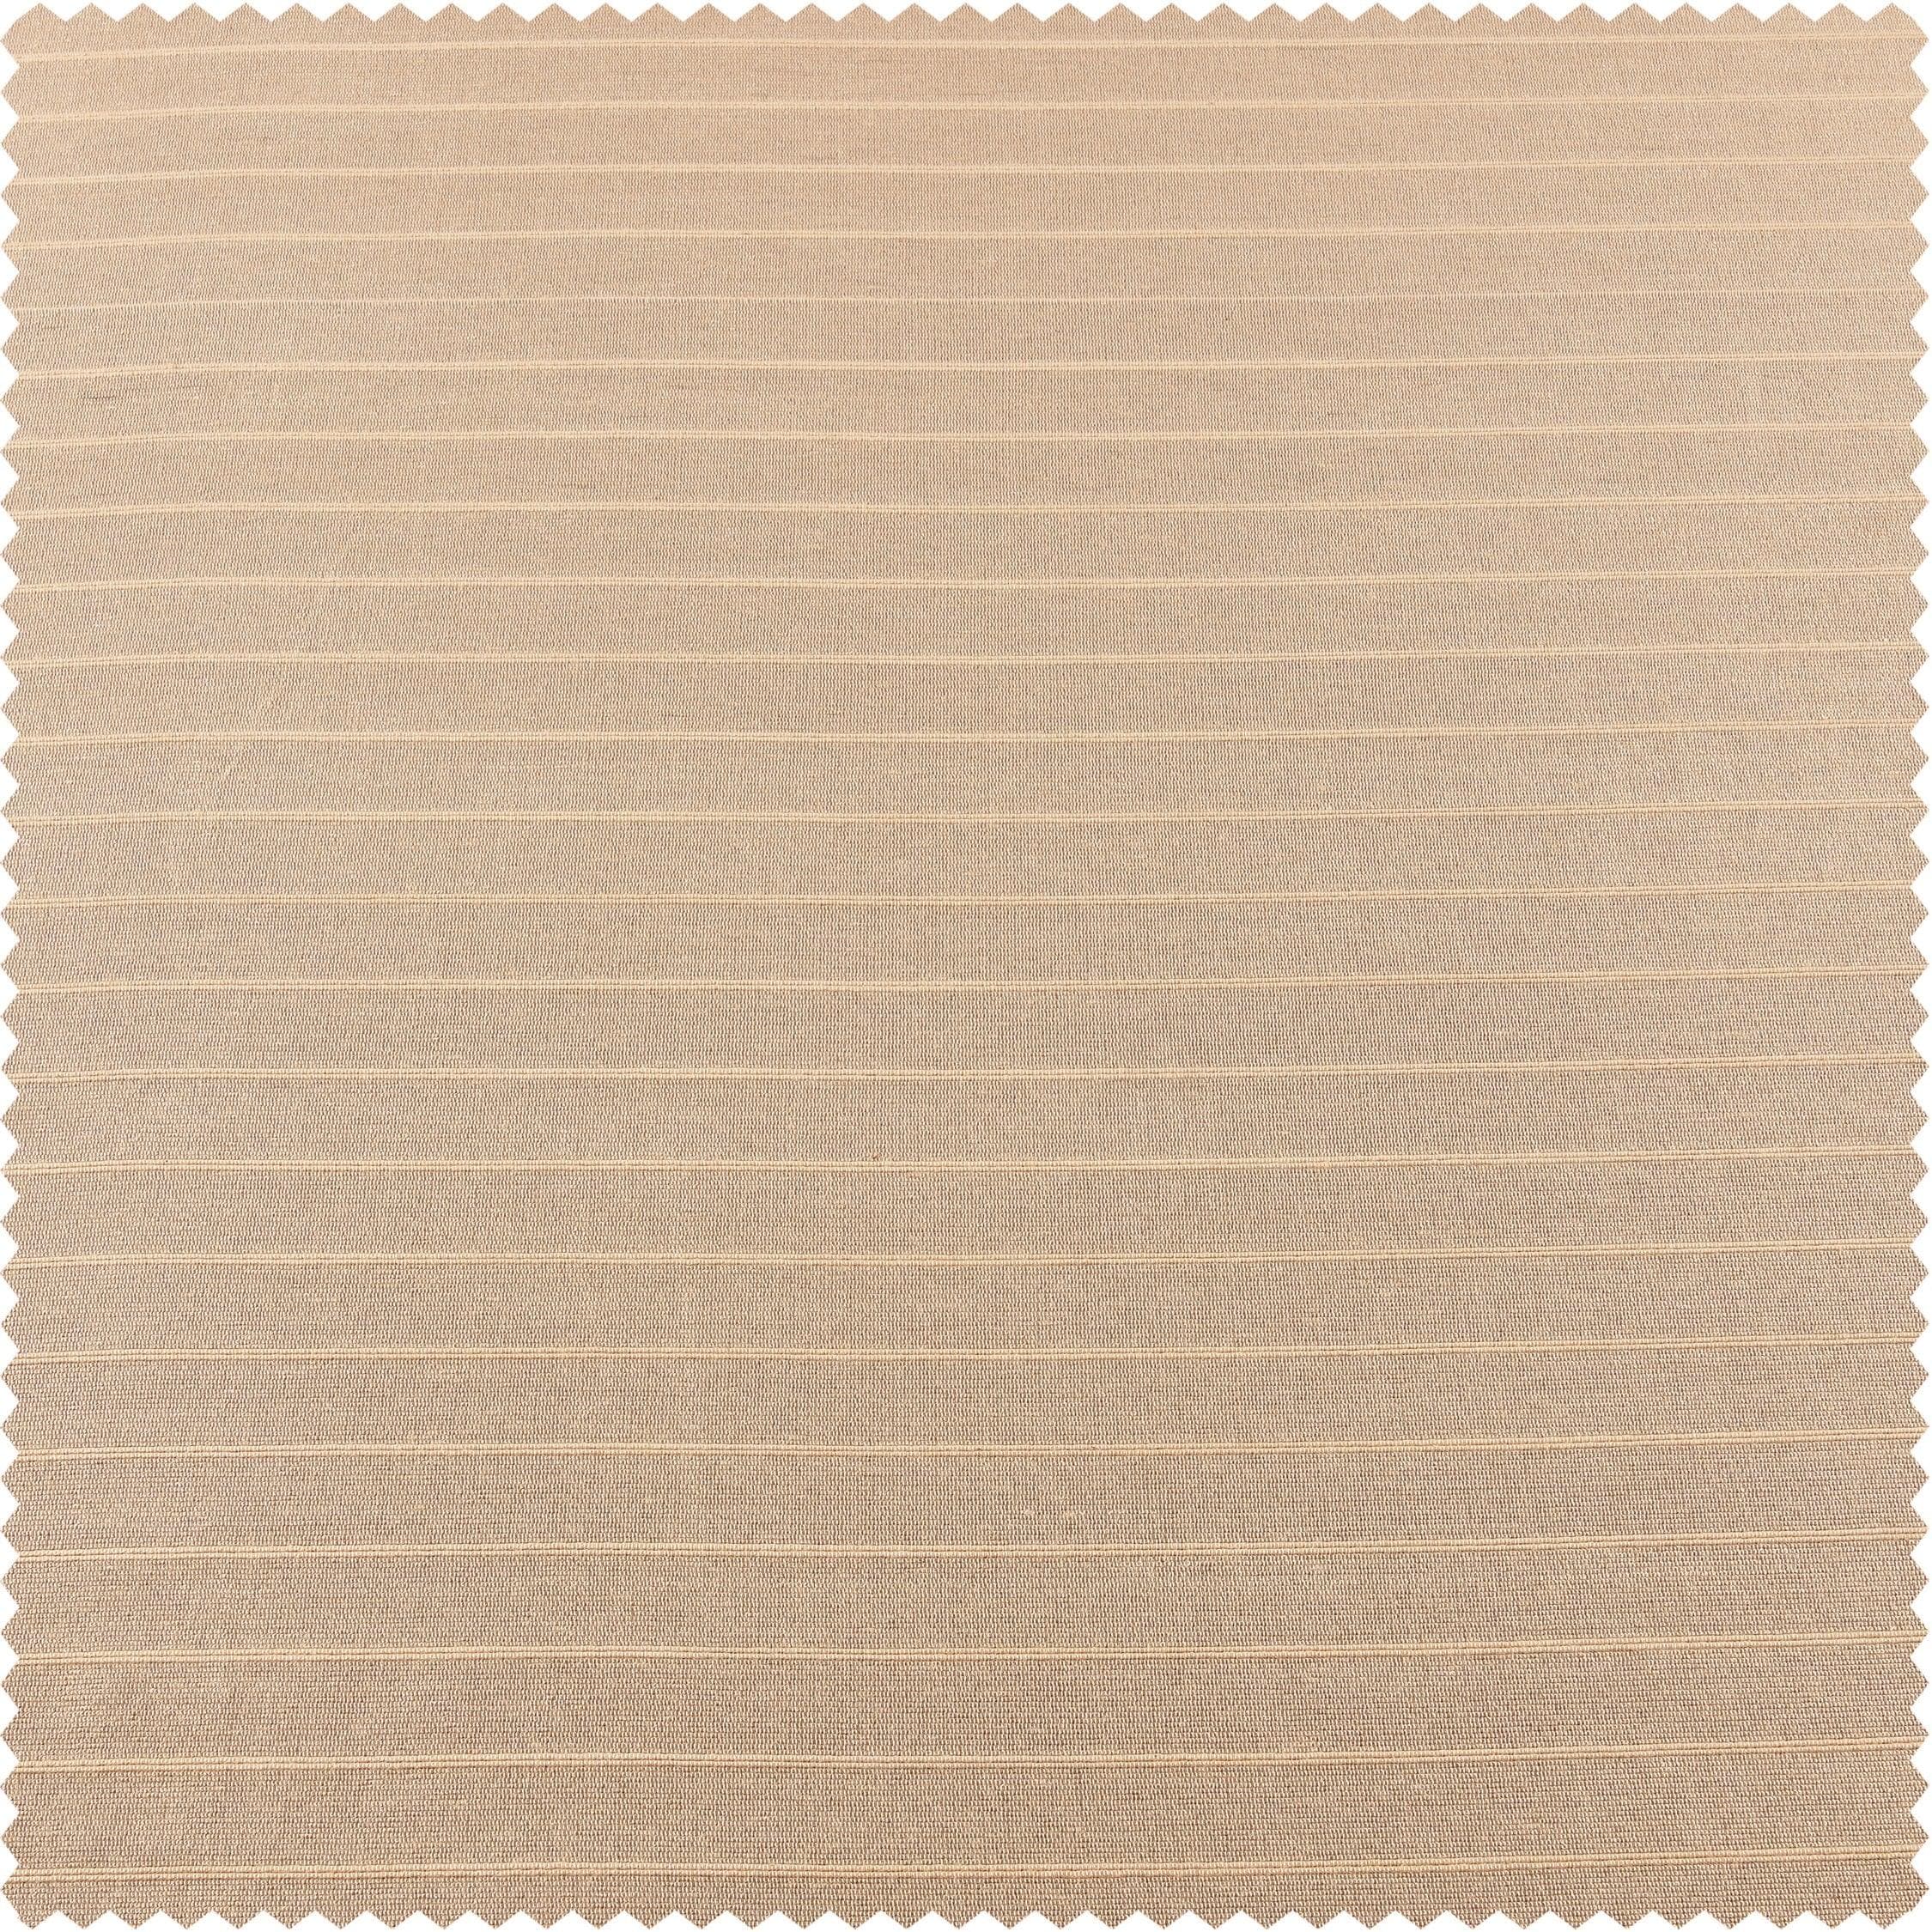 Sandcastle Tan Striped Hand Weaved Cotton Swatch